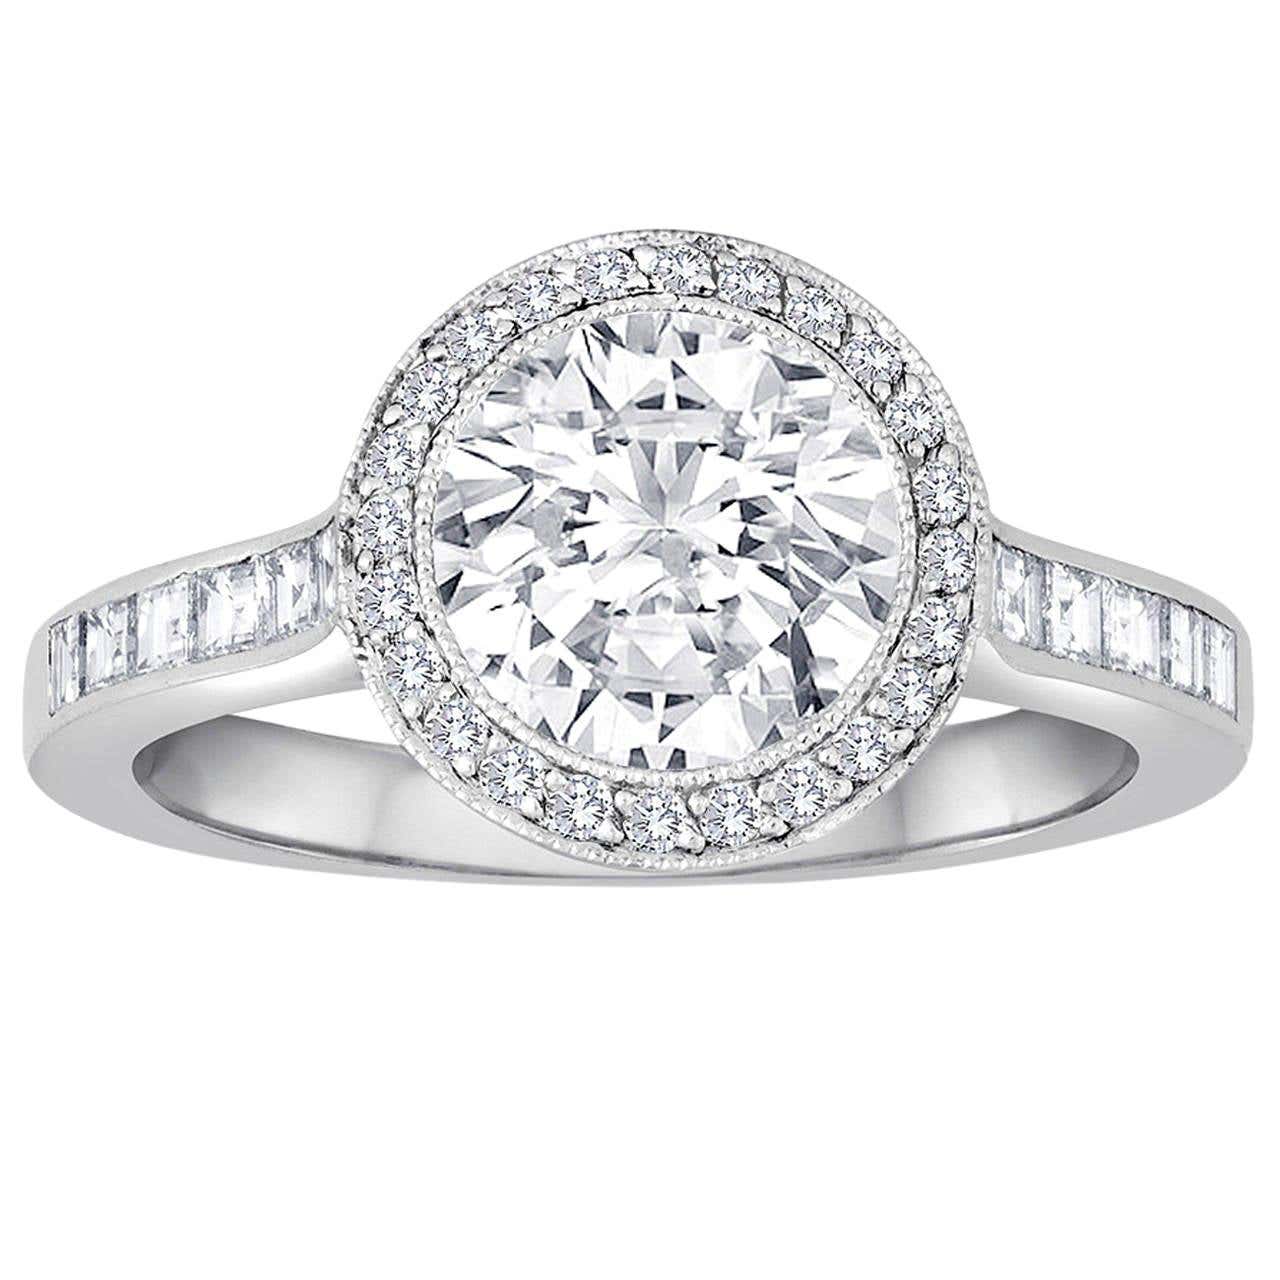 Tiffany and Co. 1.67 Carat F VVS2 Diamond Platinum Ring For Sale at 1stDibs